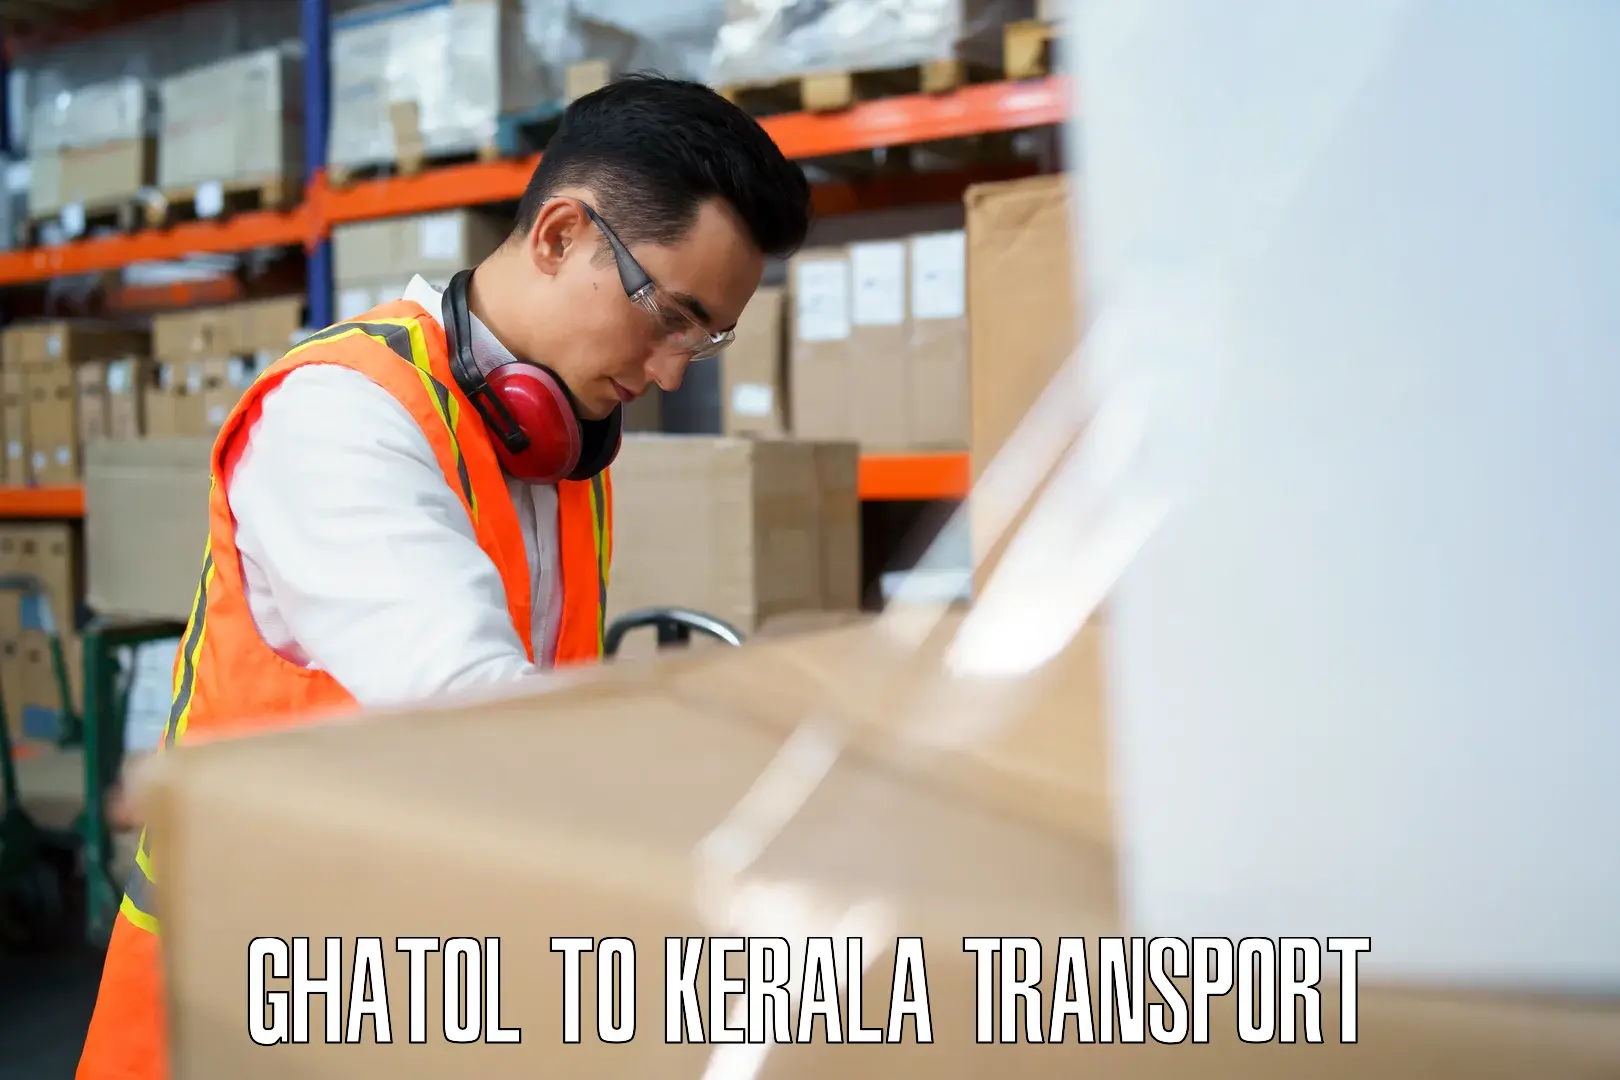 Commercial transport service Ghatol to Calicut